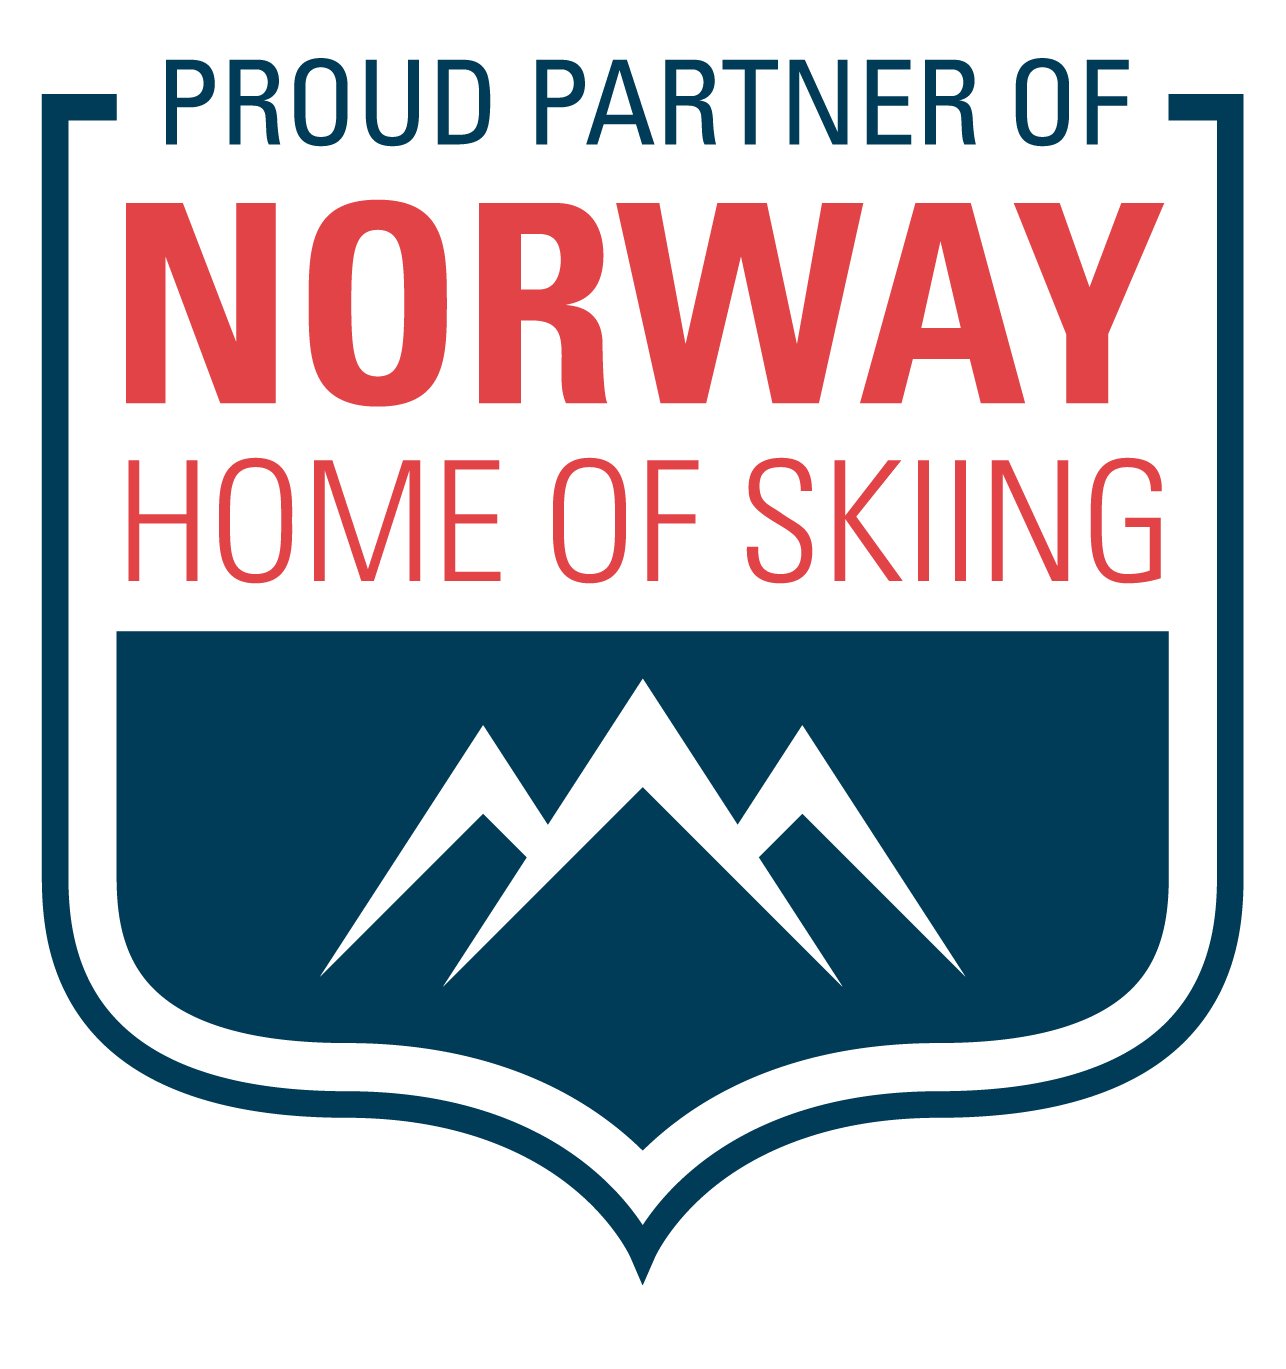 Norway home of skiing